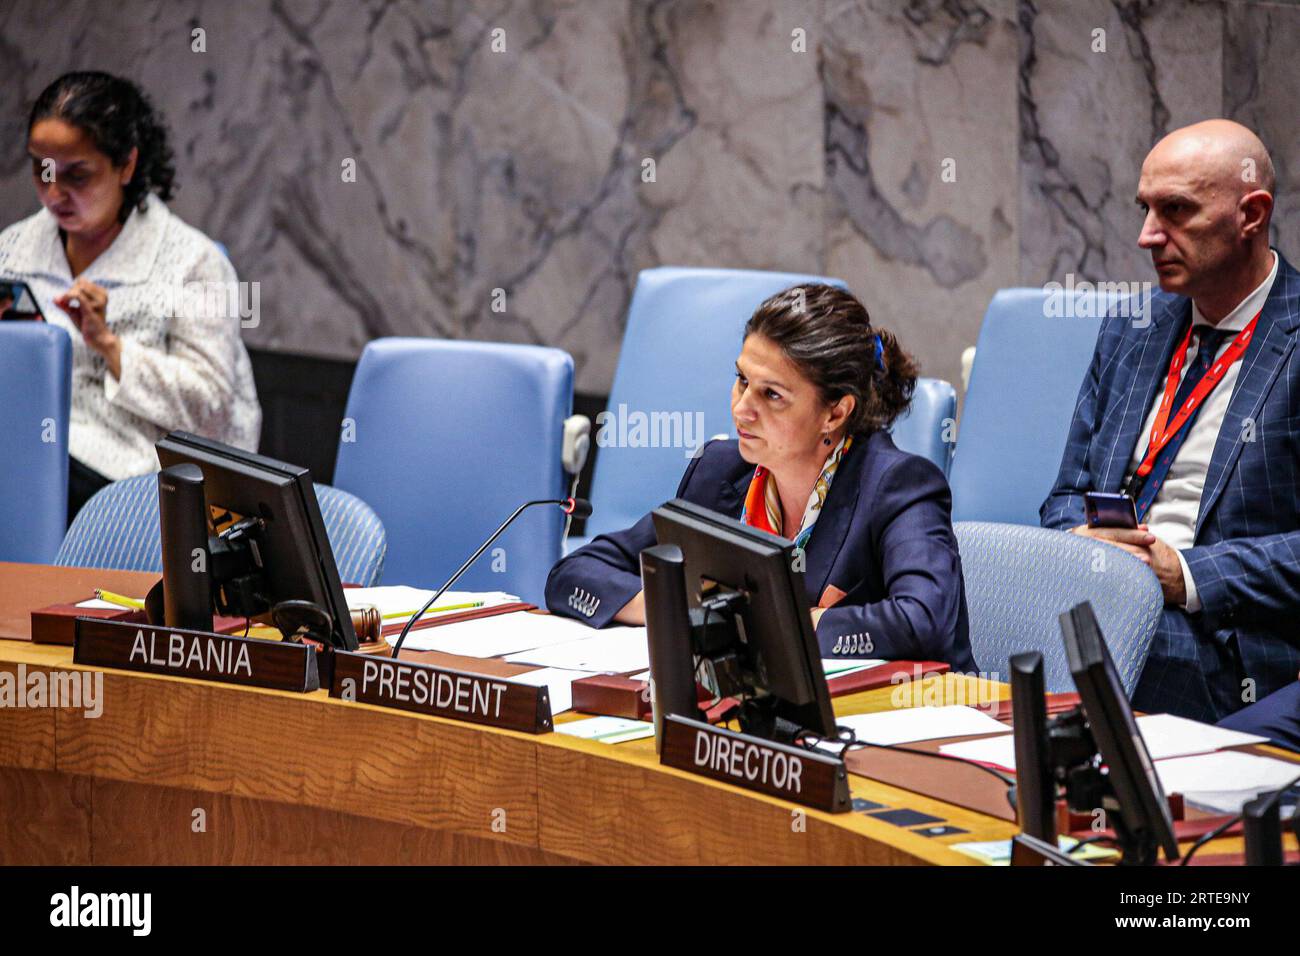 New York, New York, USA. 12th Sep, 2023. Deputy Permanent Ambassador of ALBANIA to UN, ALBANA DAUTLLARI, speaks at a UN Security Council meeting focused on Threats to International Peace and Security in which the focus was on all wars yet focused primarily on issues of the Ukraine war and deep long term effects; locally and globally. As the UN prepares for top officials meeting next week for the annual General Assembly, this year expects to have an abundantly high agenda of topics on the table that have accumulated in the pre and post-COVID years spanning roughly 3-4 years. (Credit Image: Stock Photo